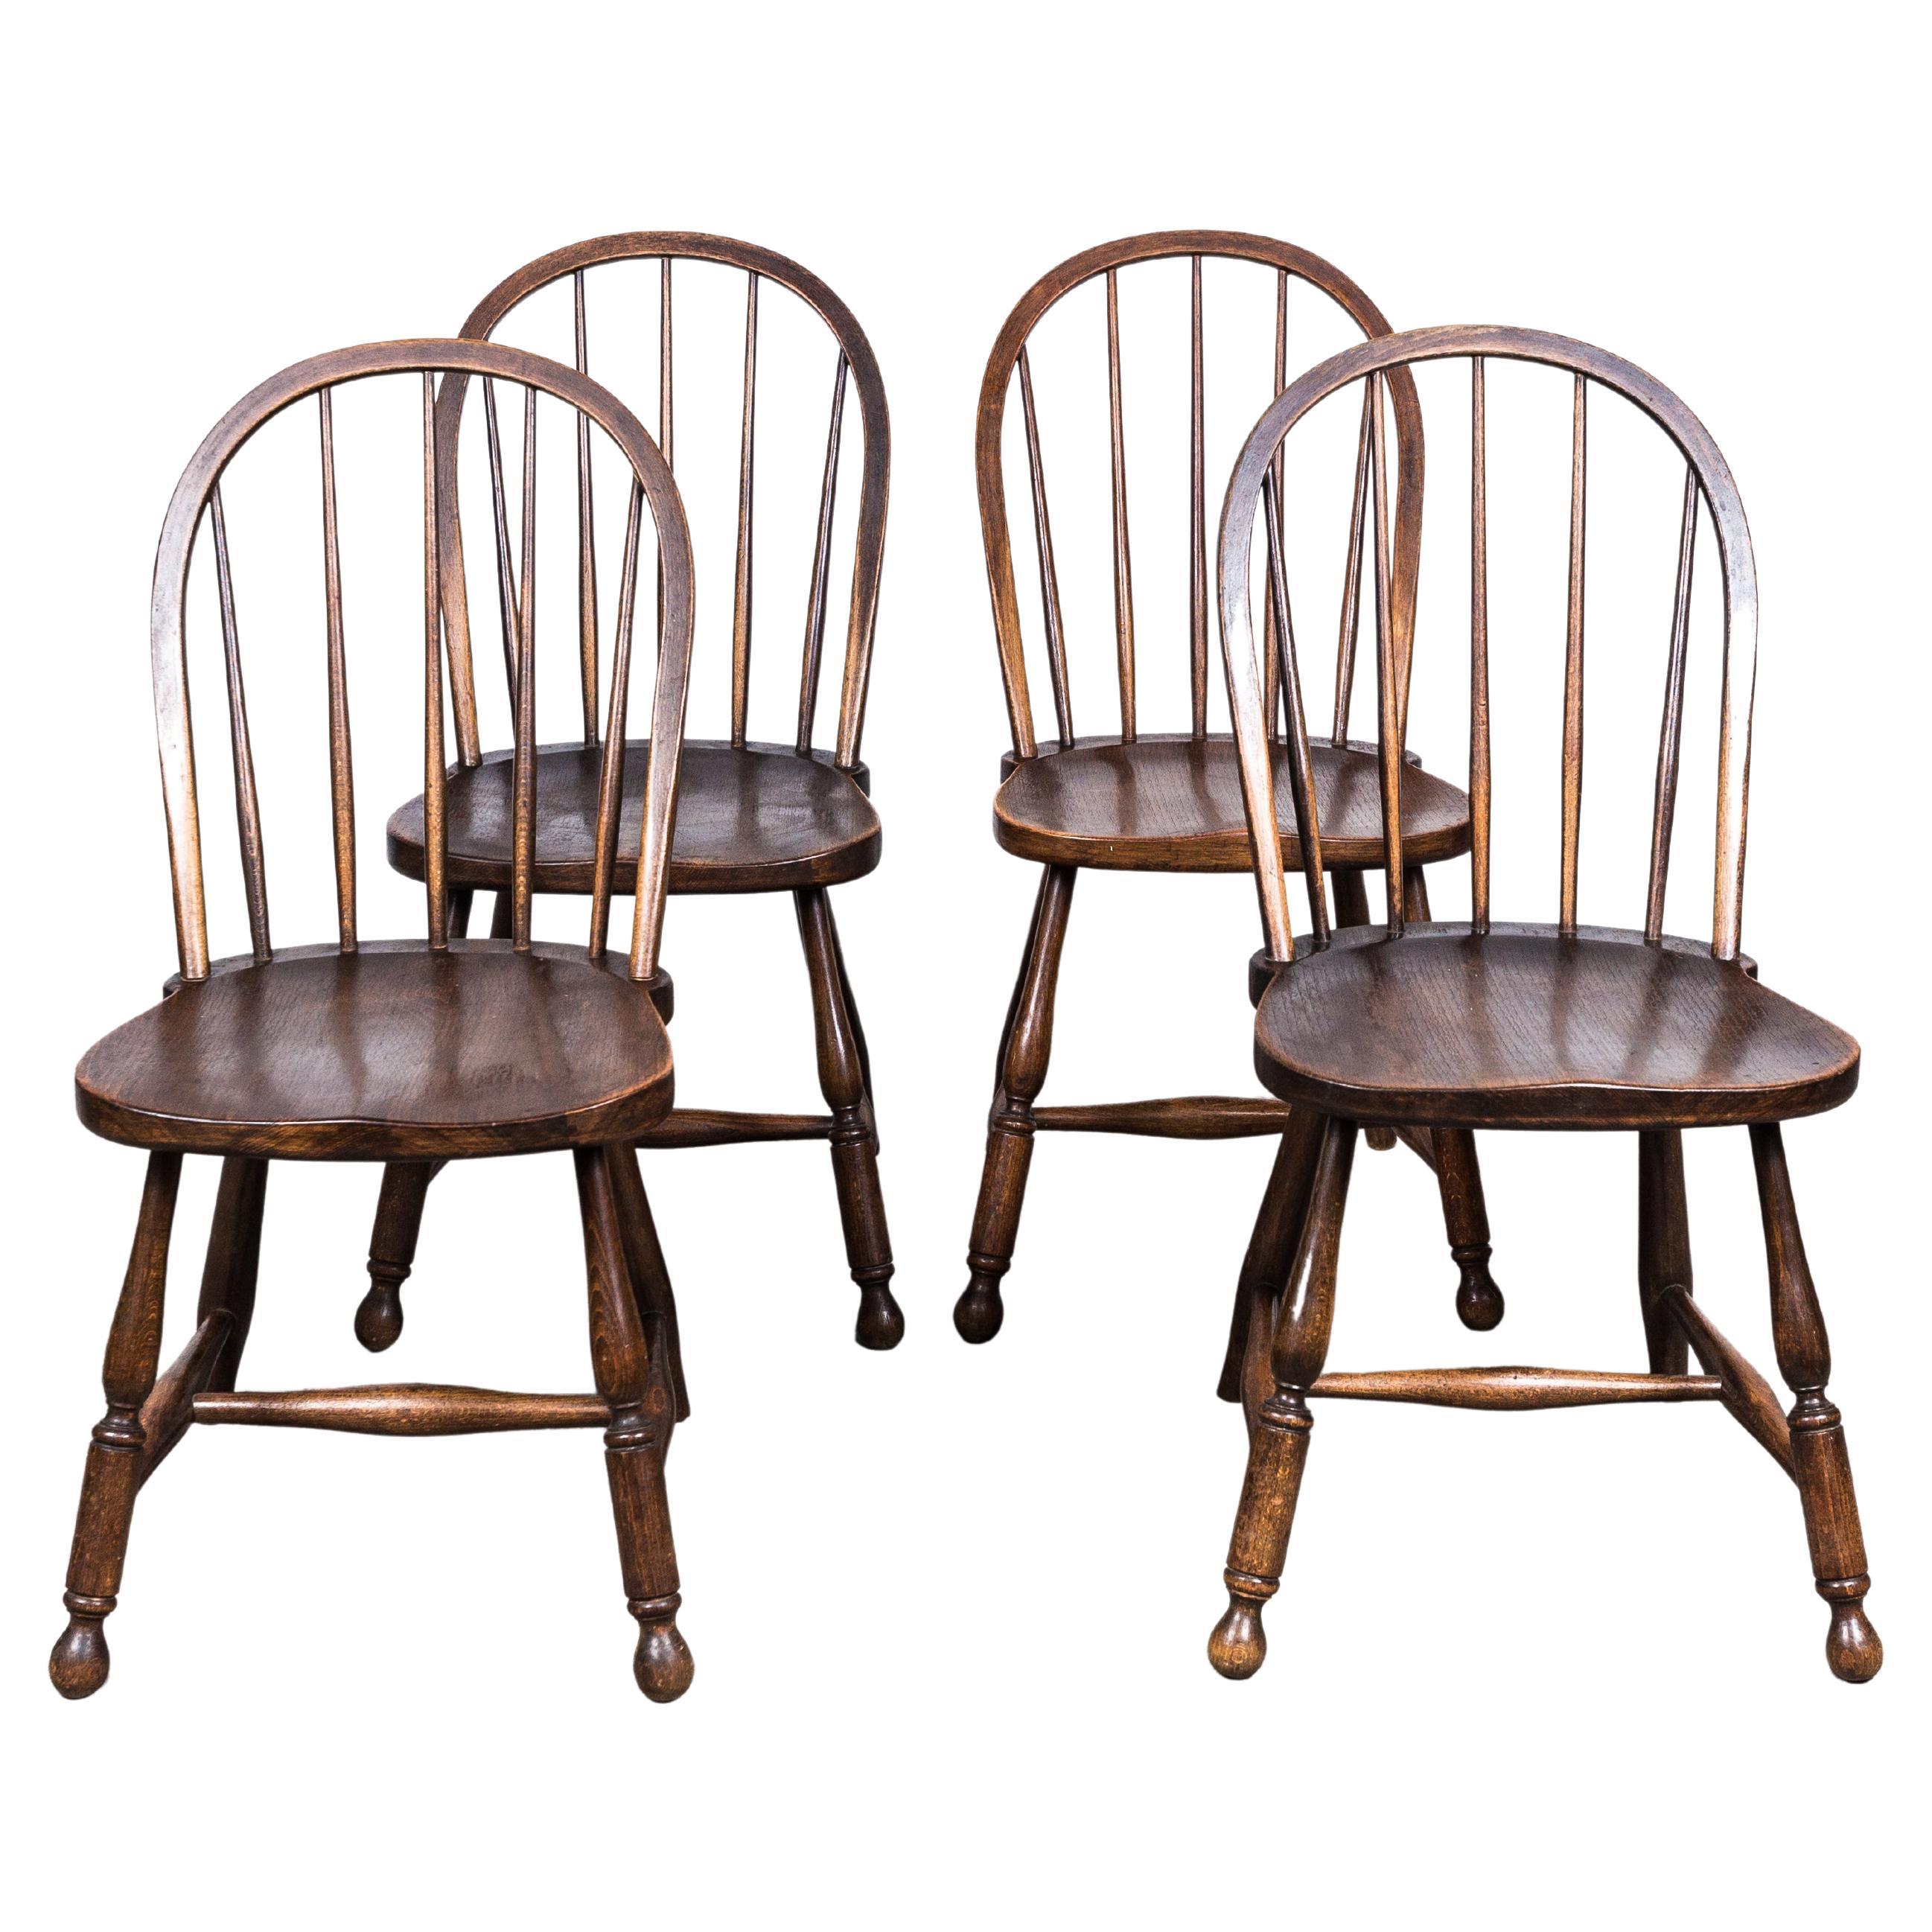 Very rare Thonet B 946 chairs by Josef Frank For Sale